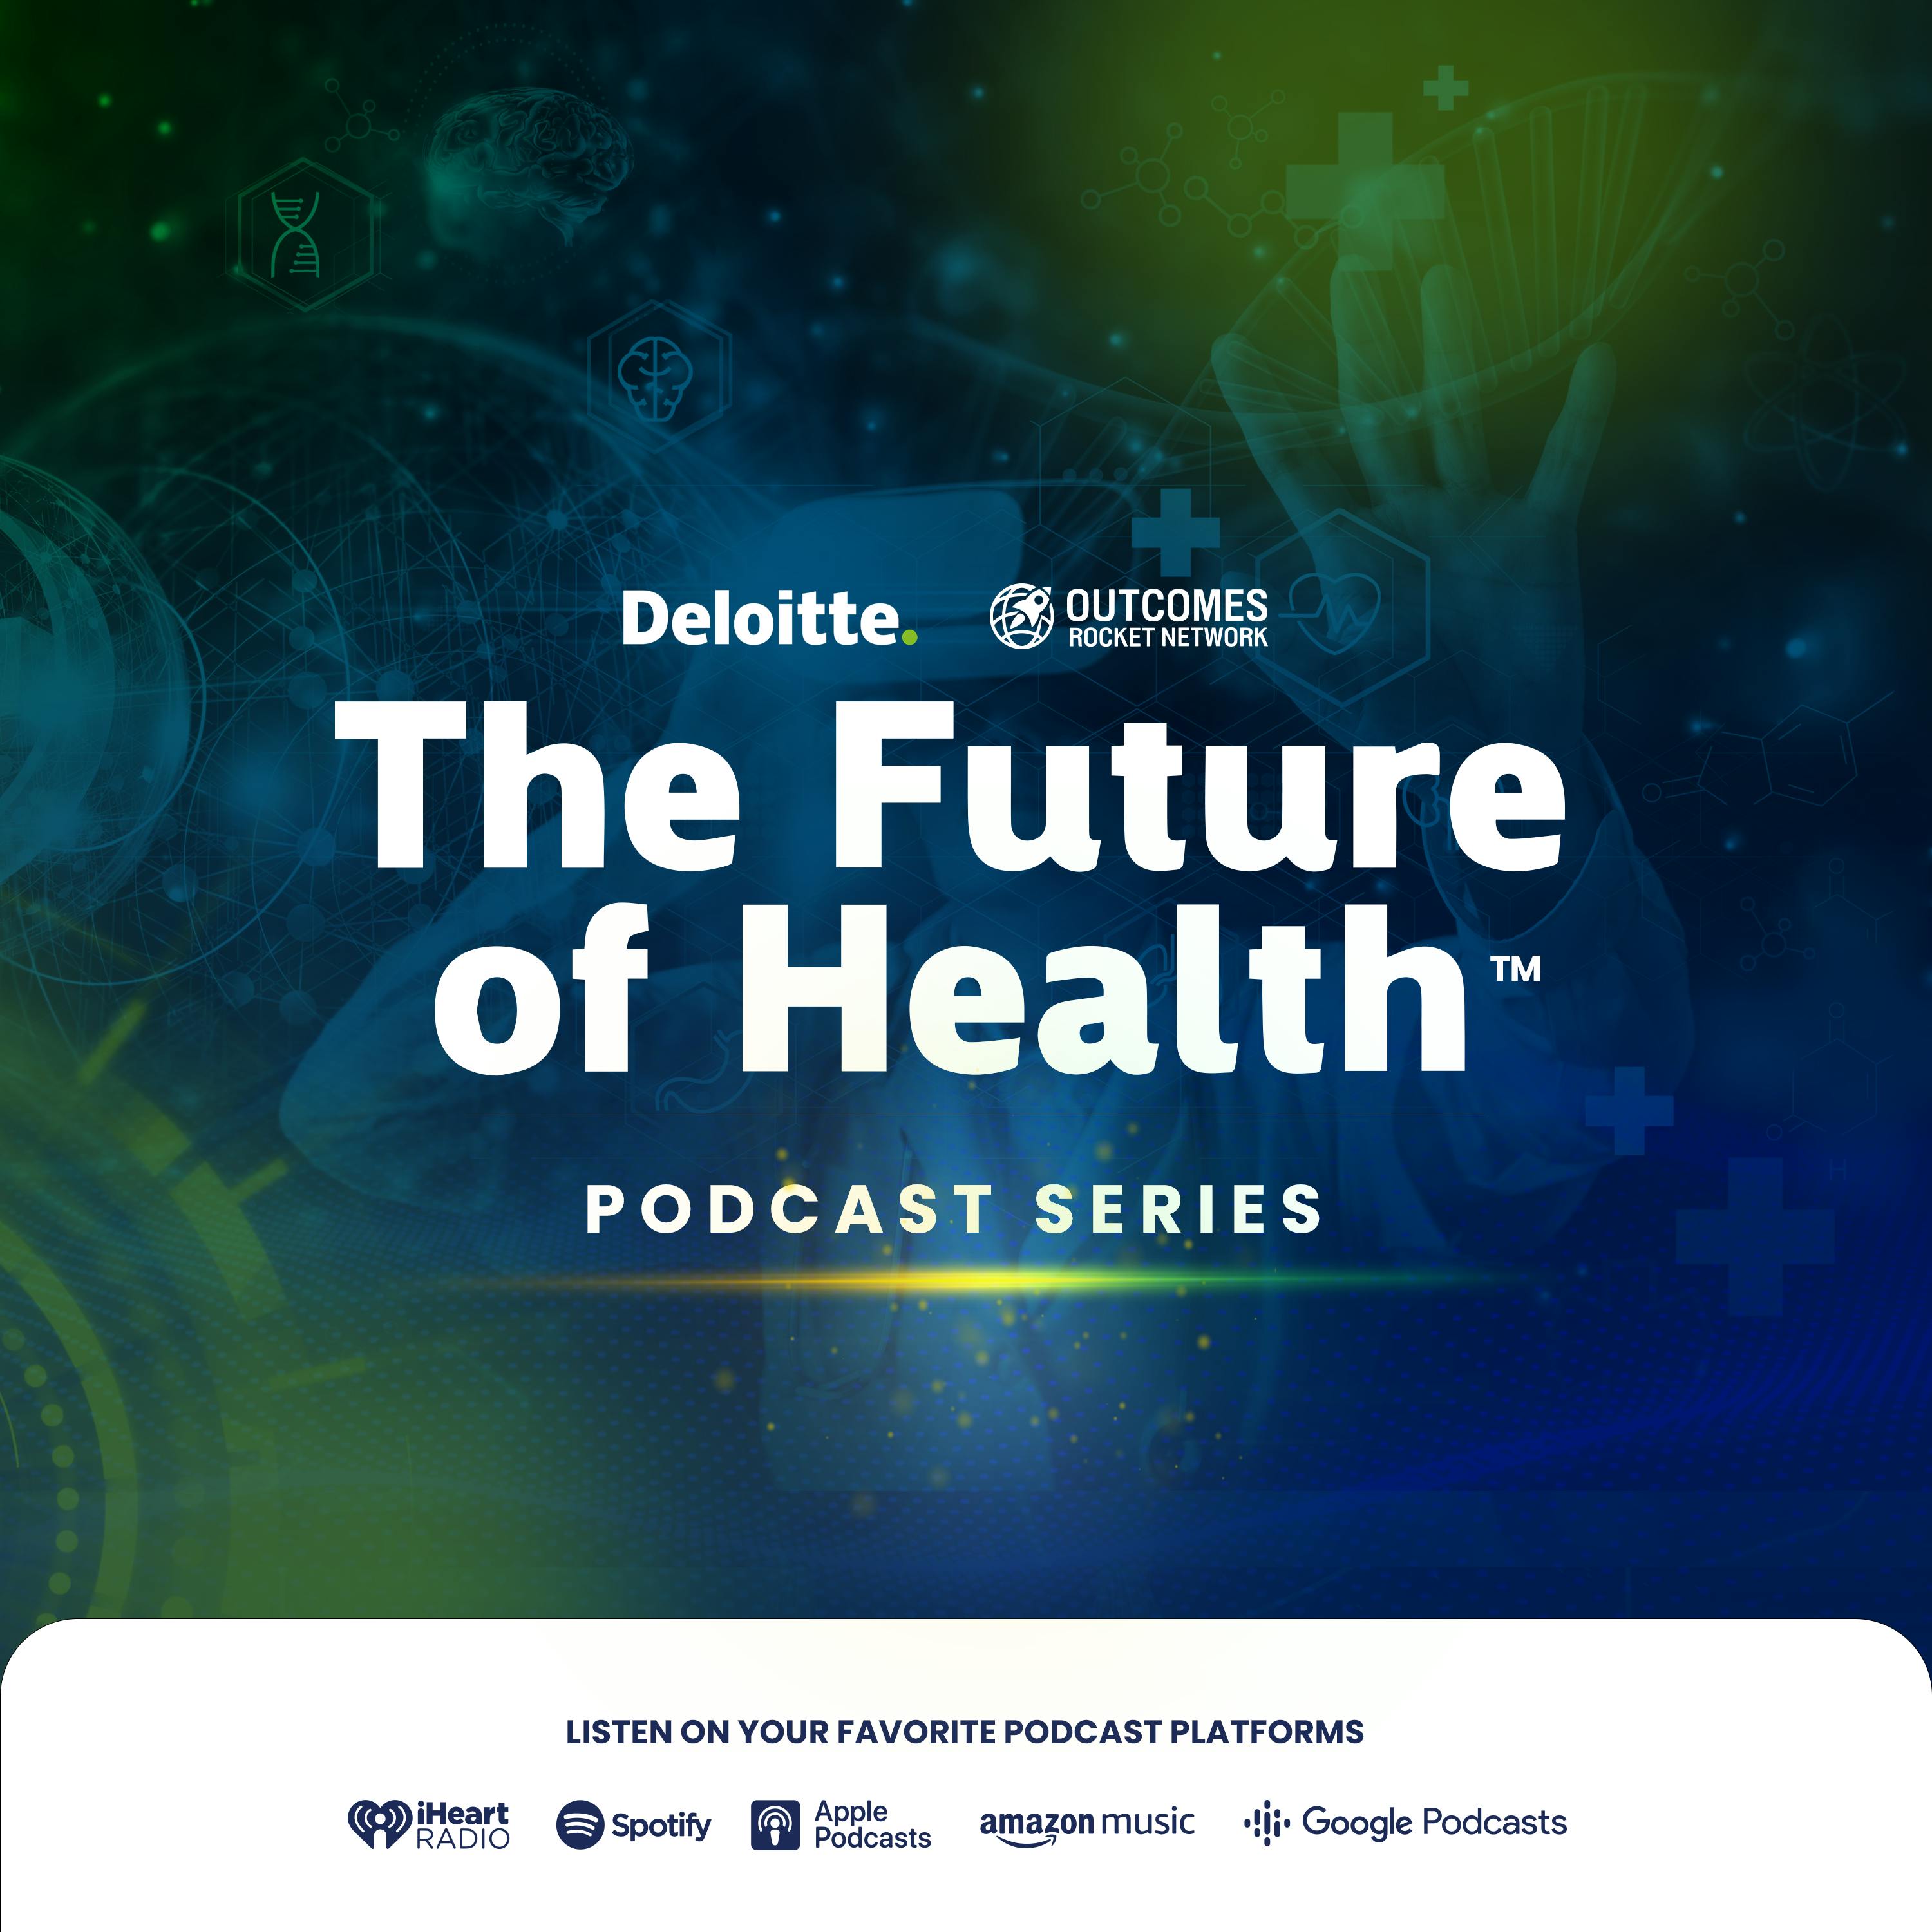 Future of Health Series: Breaking the Cost Curve: A Path to $4T in Savings with Andrew Davis, Principal for Deloitte Consulting LLP’s Health Care Practice